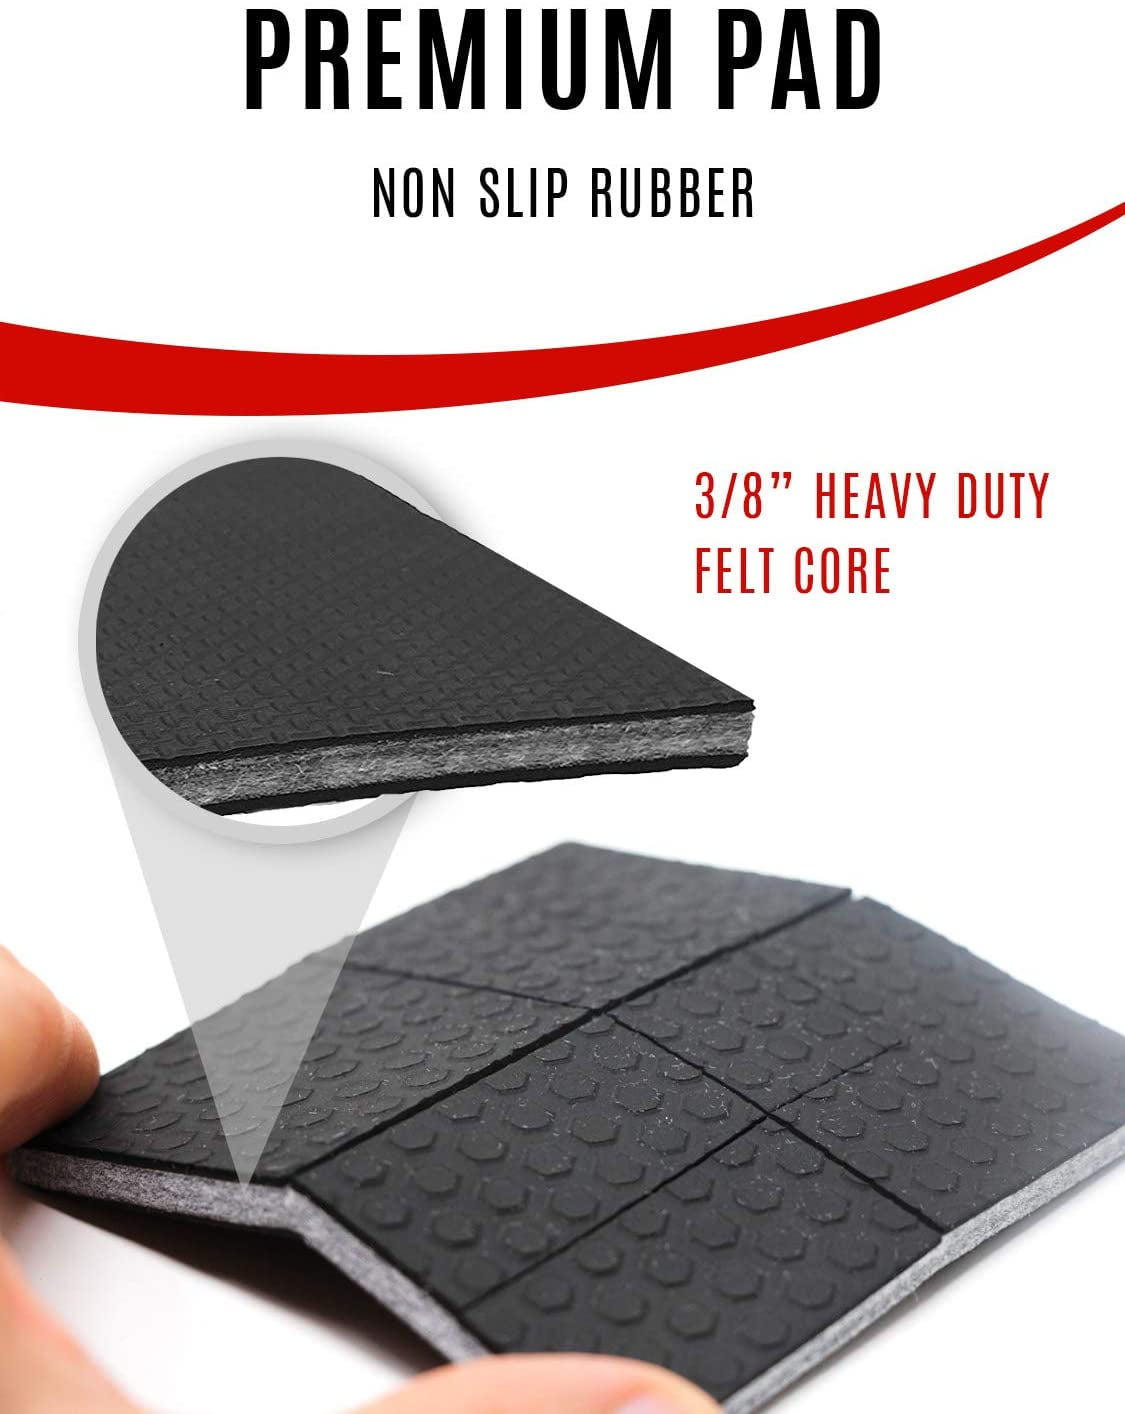 Foboull Mattress Slide Stopper and Gripper,Slip Mattress Grip Pads,Non slip  mattress pad,Keep Bed and Topper Pad from Sliding for Sofa, Couch, Chair